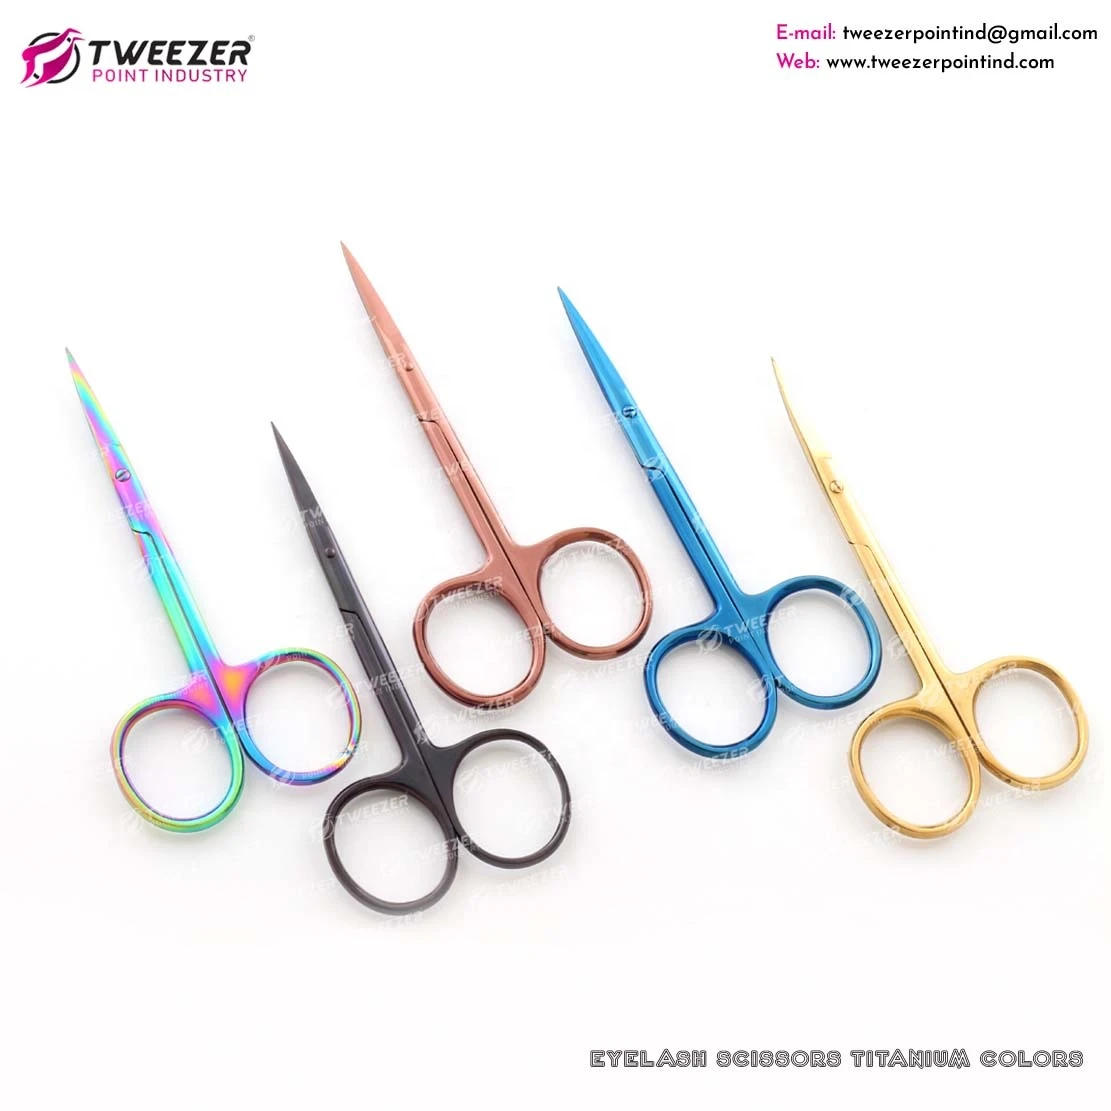 Nail Cuticle Scissor, Stainless Steel To Trim Nails & Eyebrows, Hair Eyelashes Curved Sharp Blade